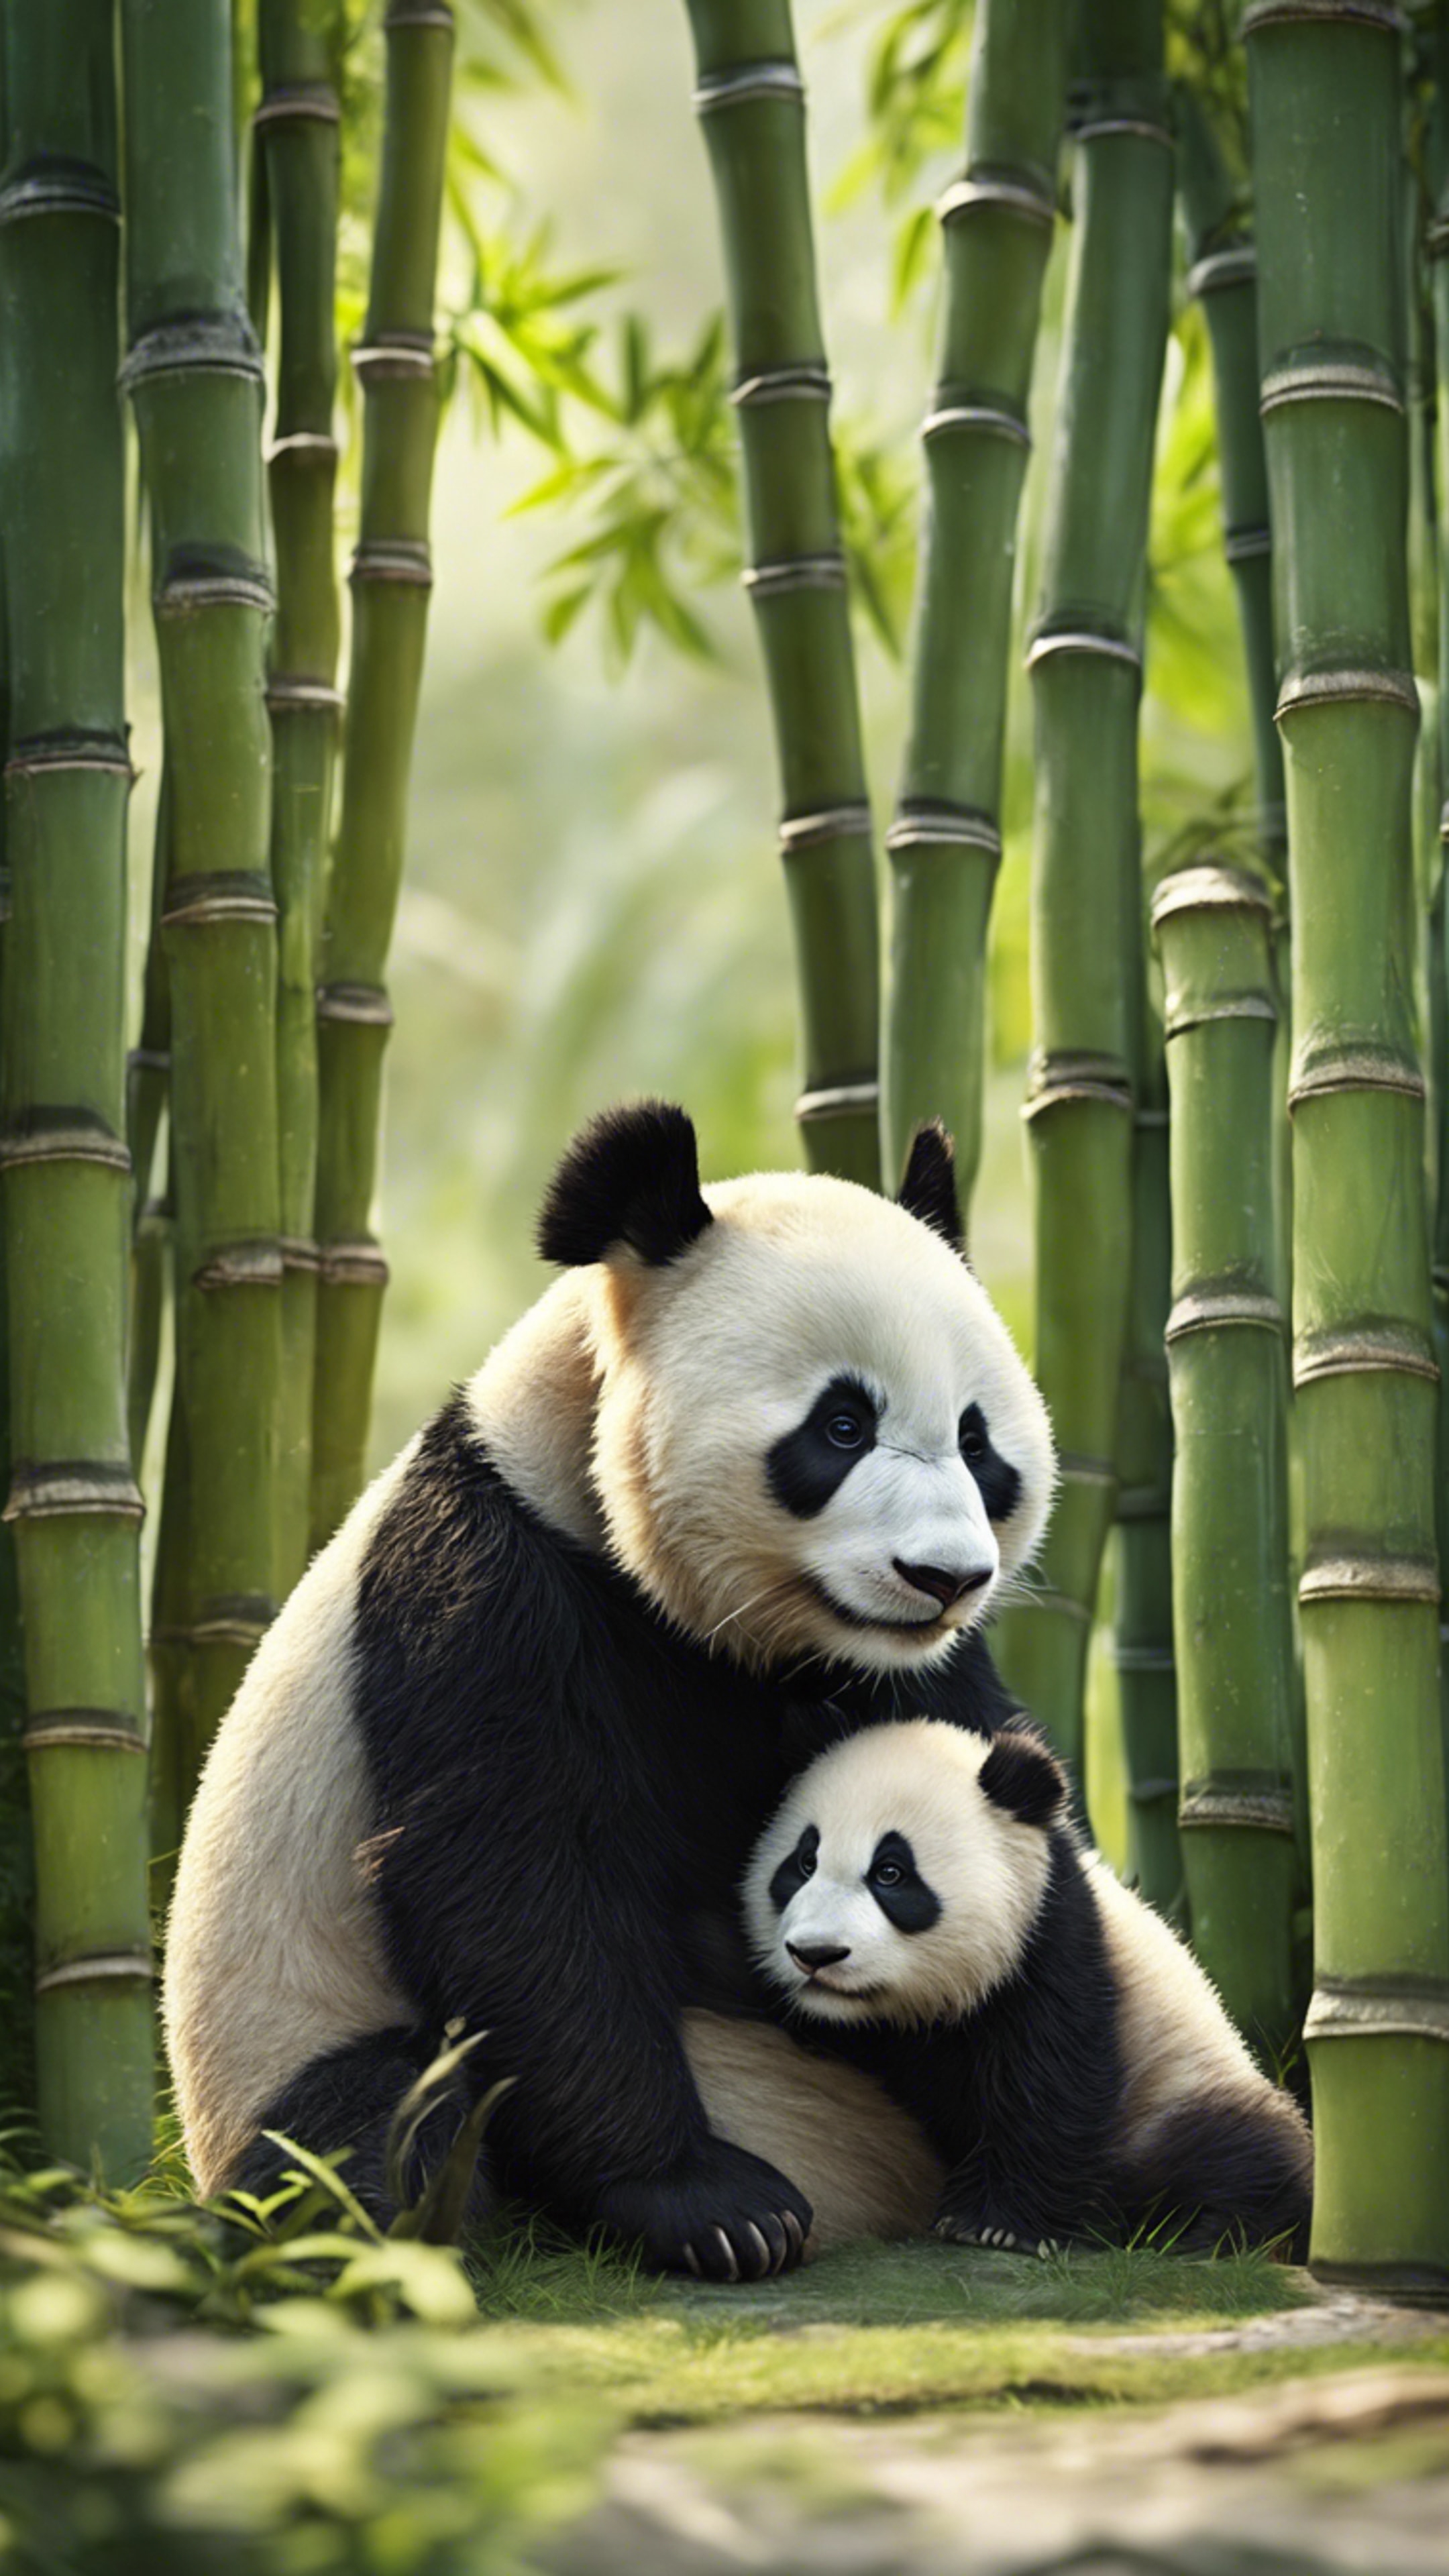 A mother panda teaching her cub to climb a bamboo tree in a tranquil jungle setting. Ταπετσαρία[bf956daca53d4d23a107]